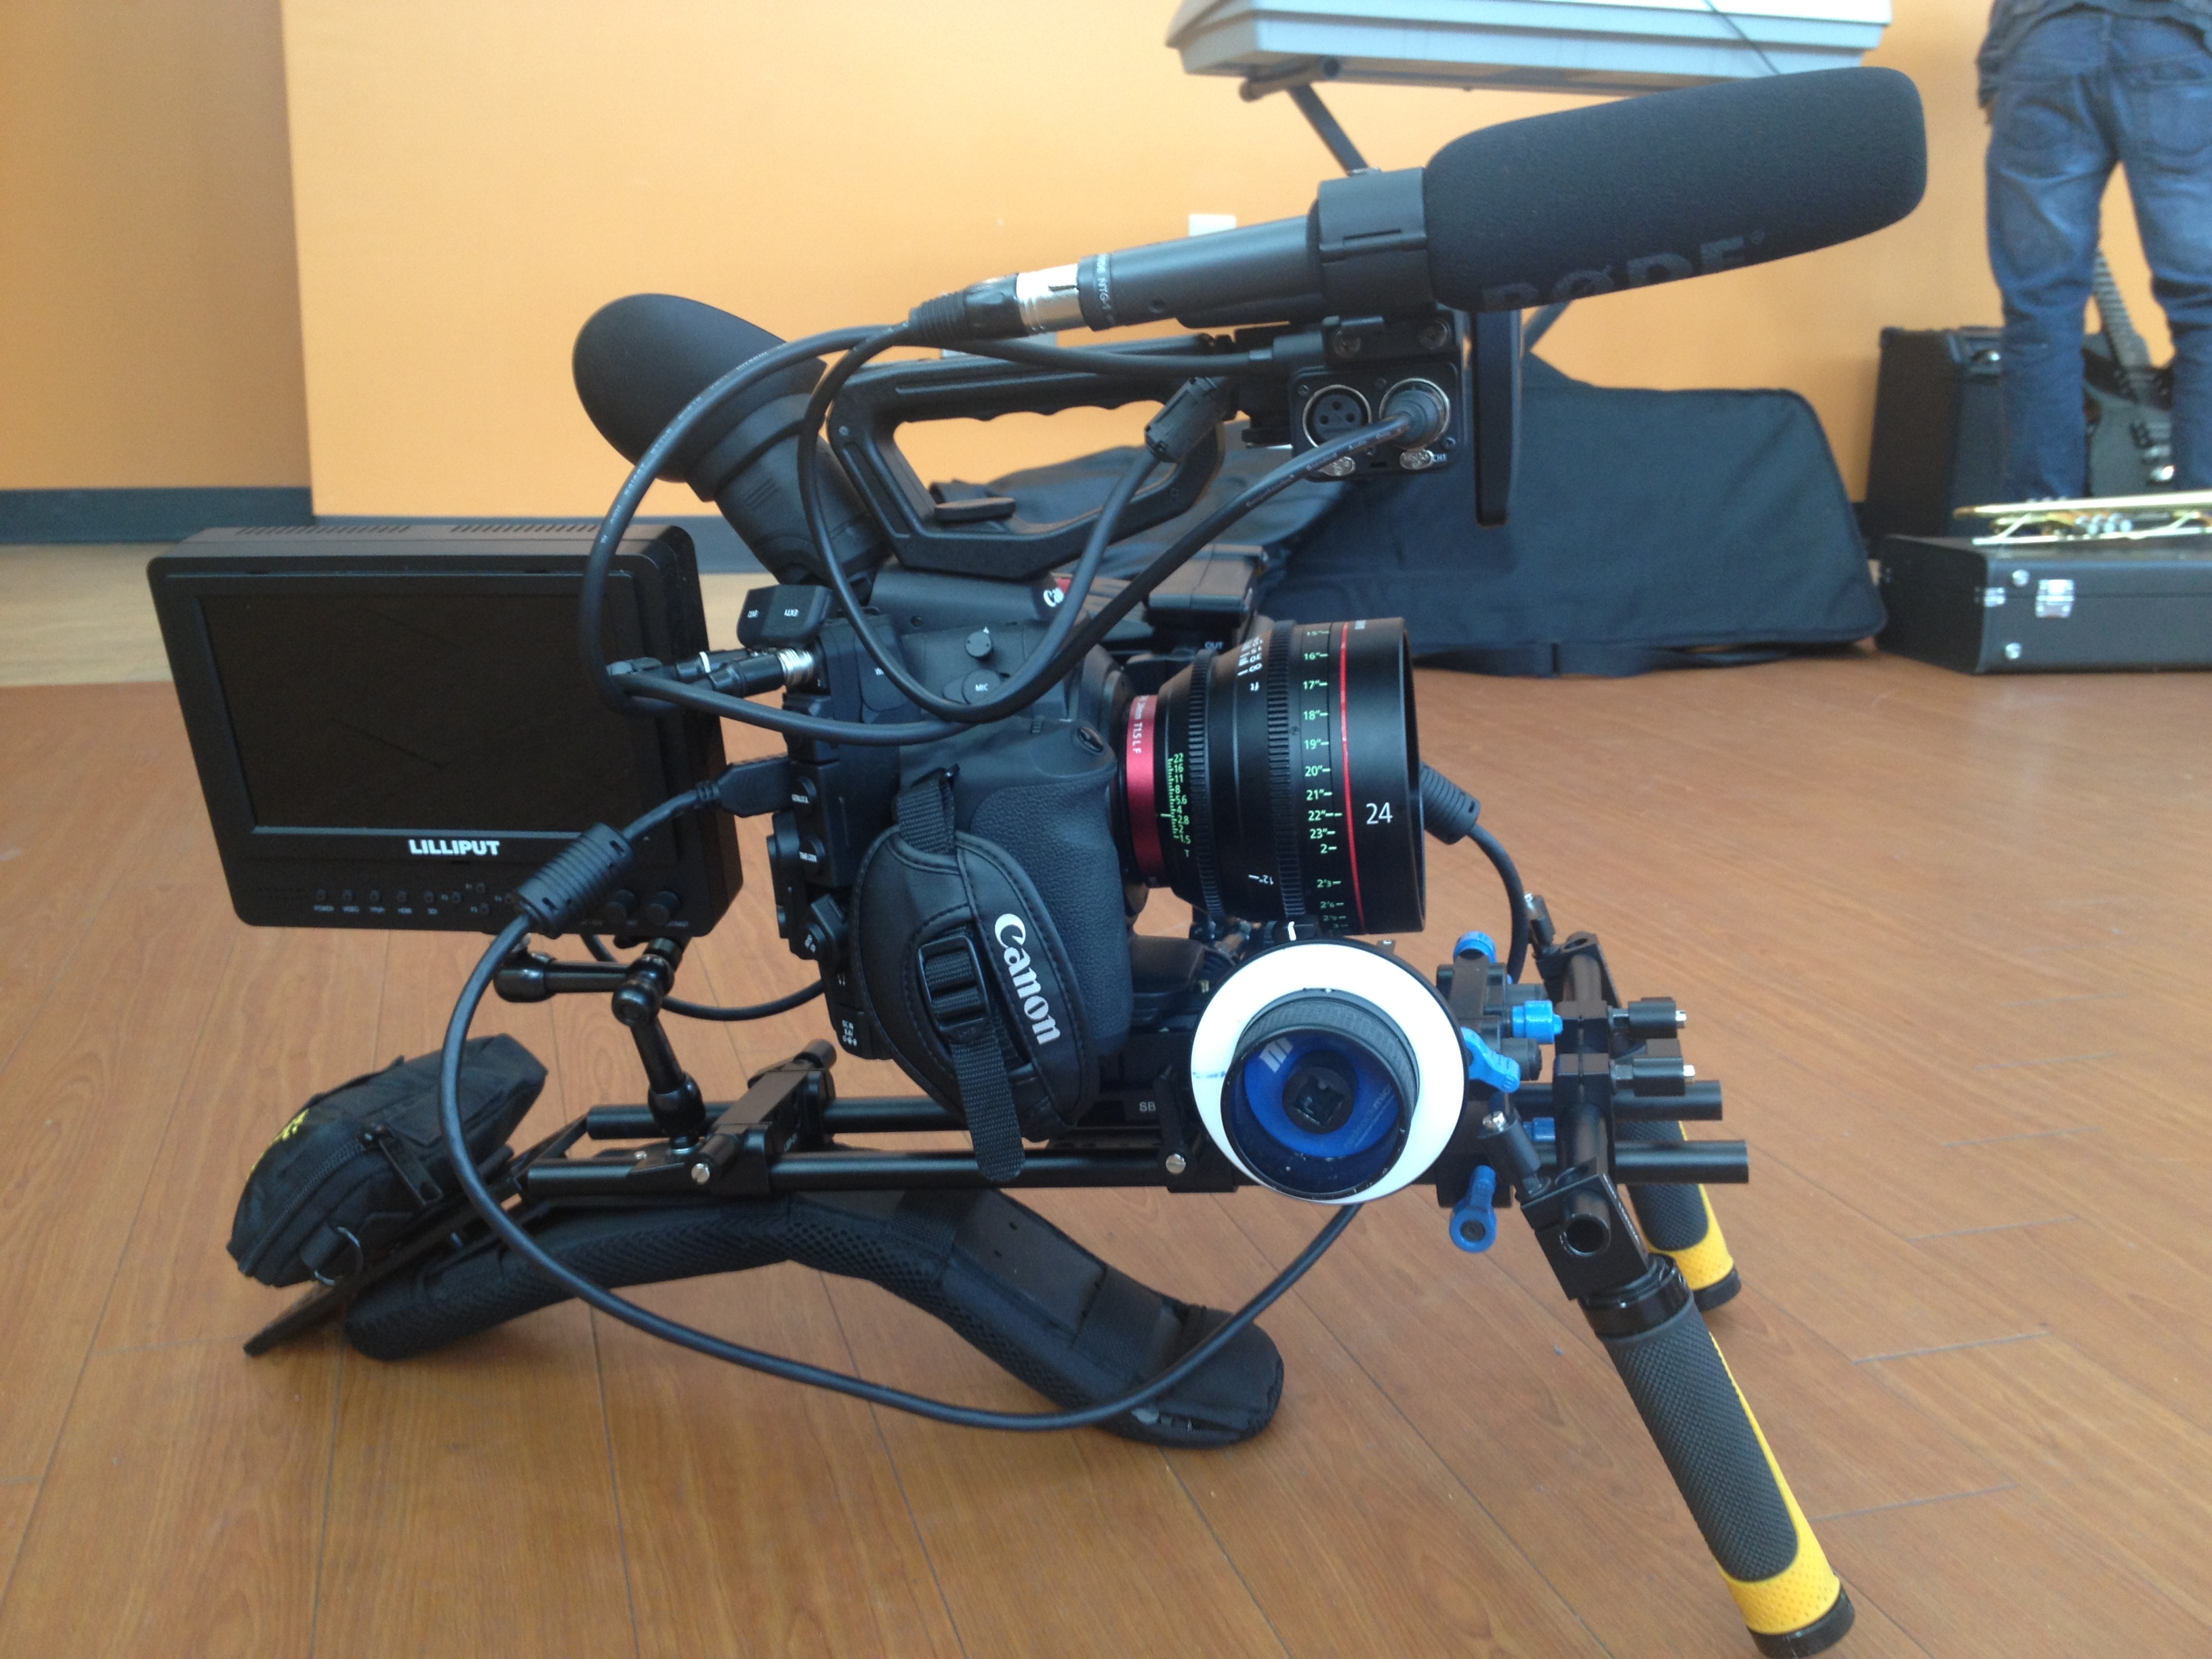 My Canon C300...love this camera. The product that it produces is AWESOME!!